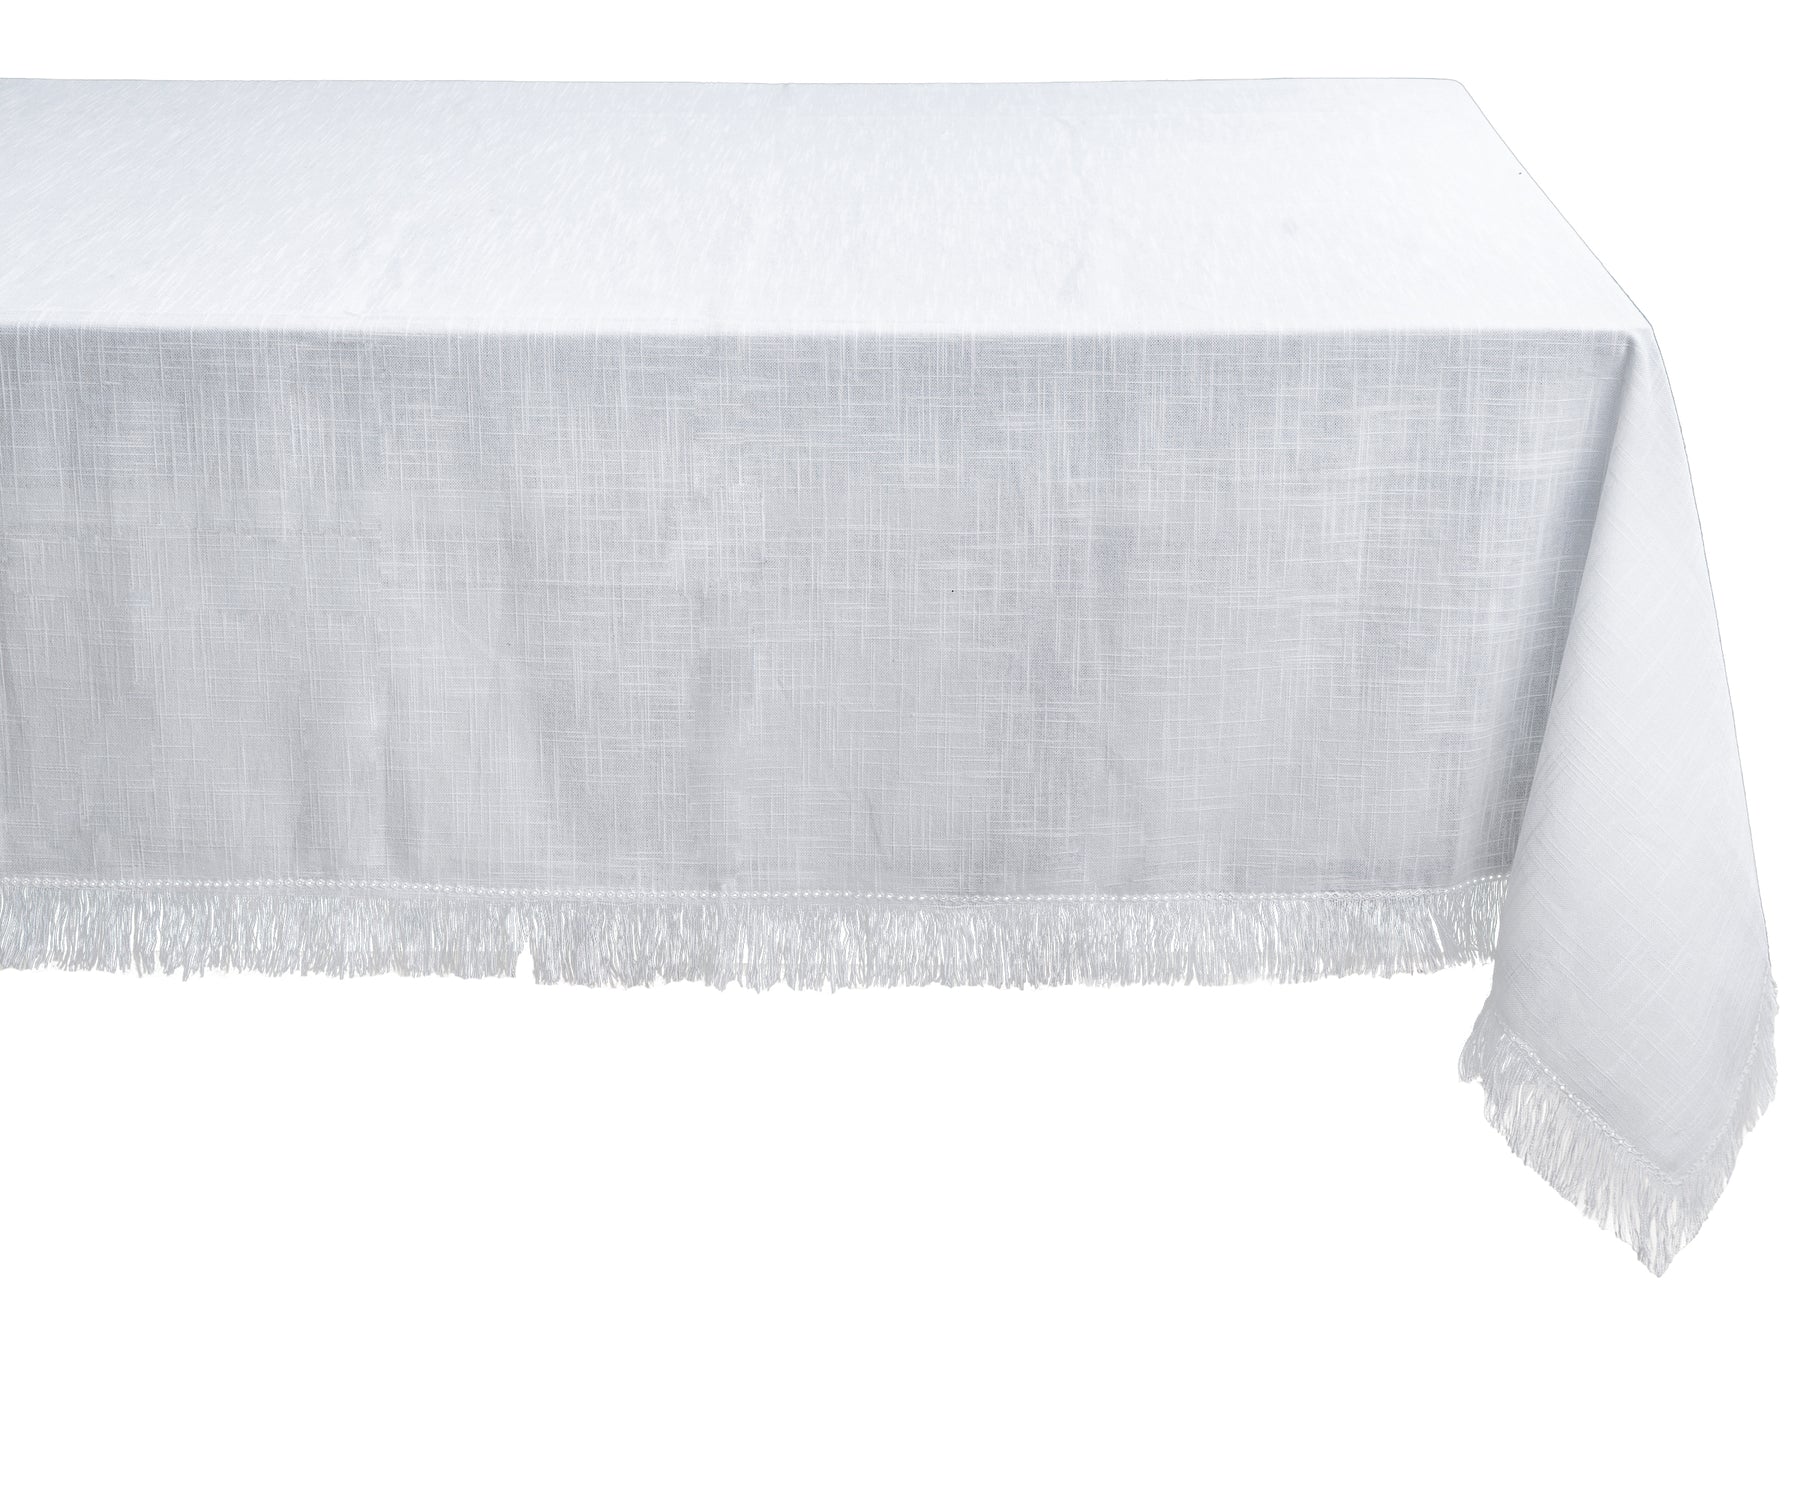 White tablecloths offer timeless elegance and adapt beautifully to diverse events, from casual to formal.Party-ready tablecloths perfect for night-time events or festive occasions